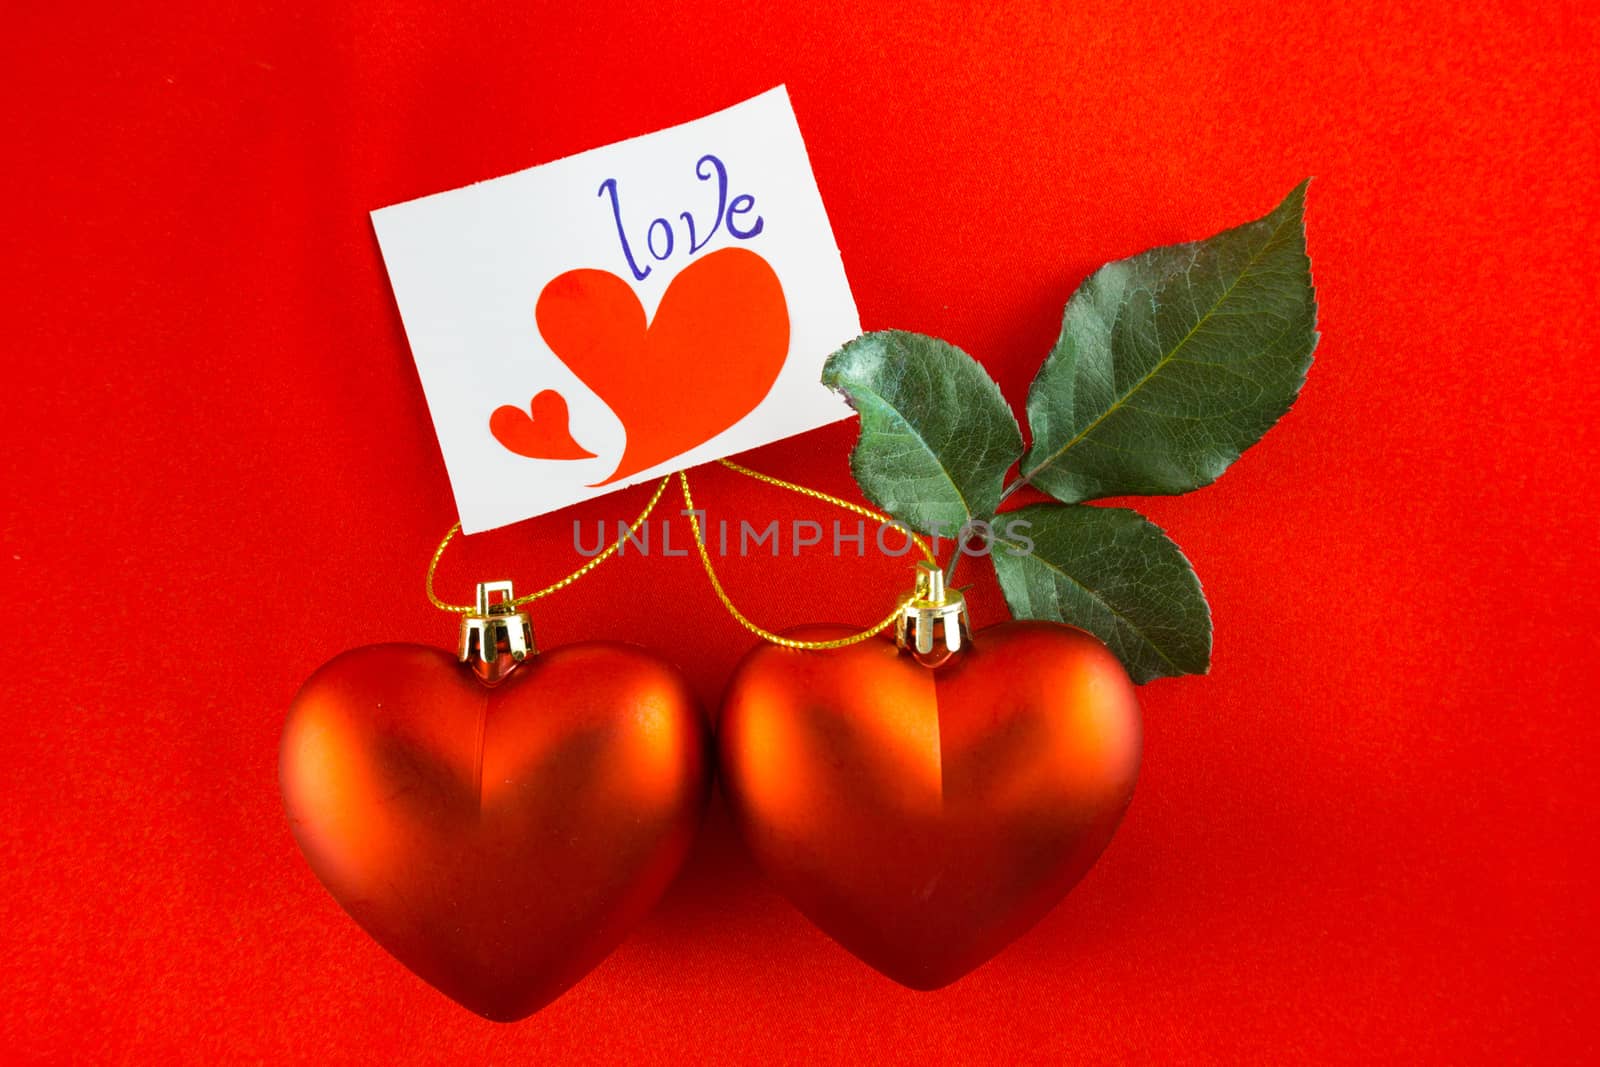 Red heart Valentines with message card on red background. Image of Valentines day.